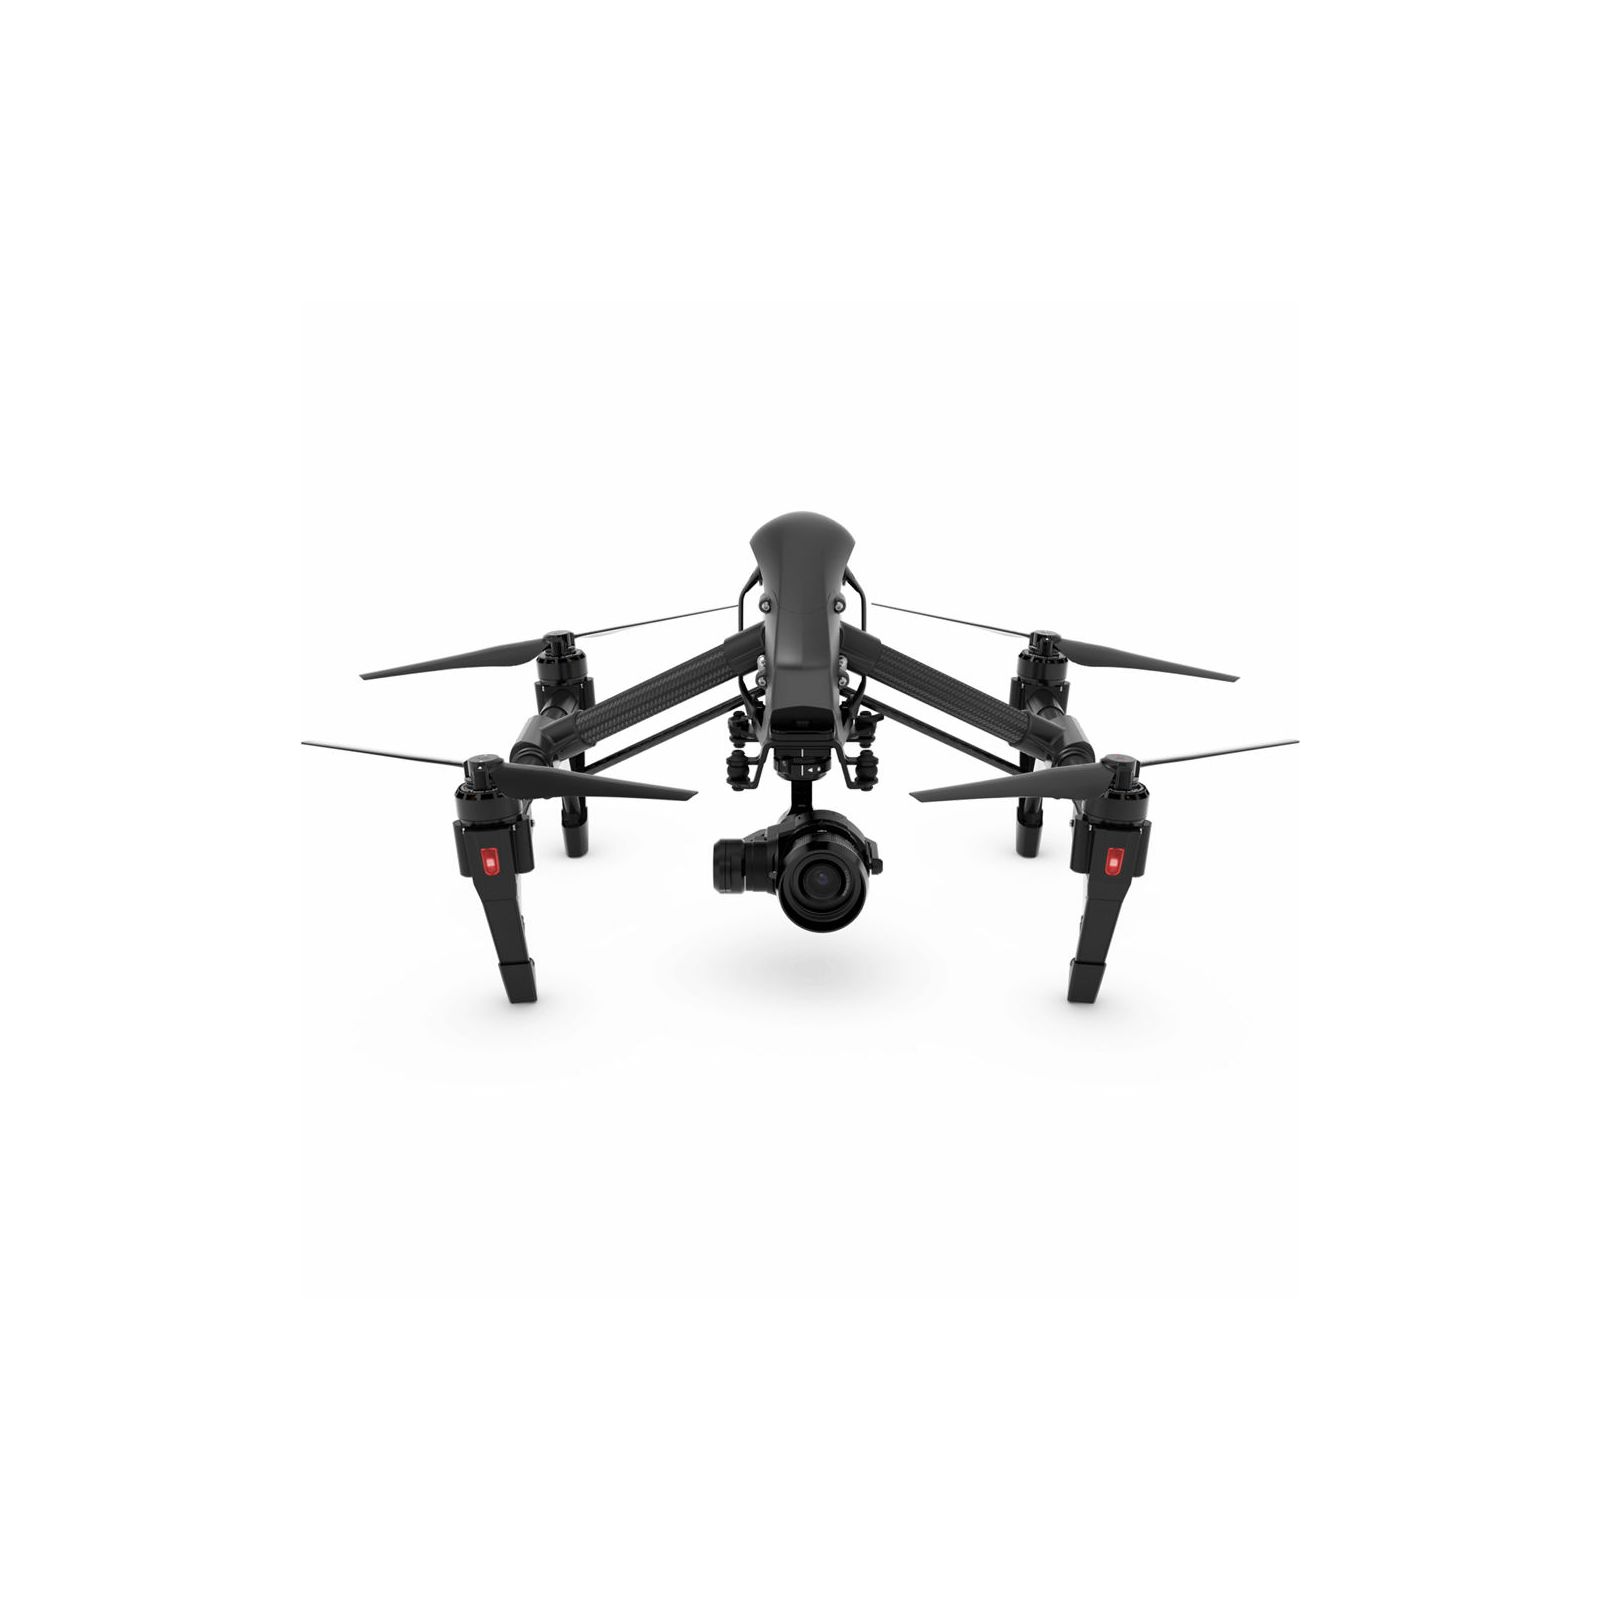 Inspire 1 PRO Black Edition Quadcopter with Zemuse X5 4K Camera and 3-Axis Gimbal